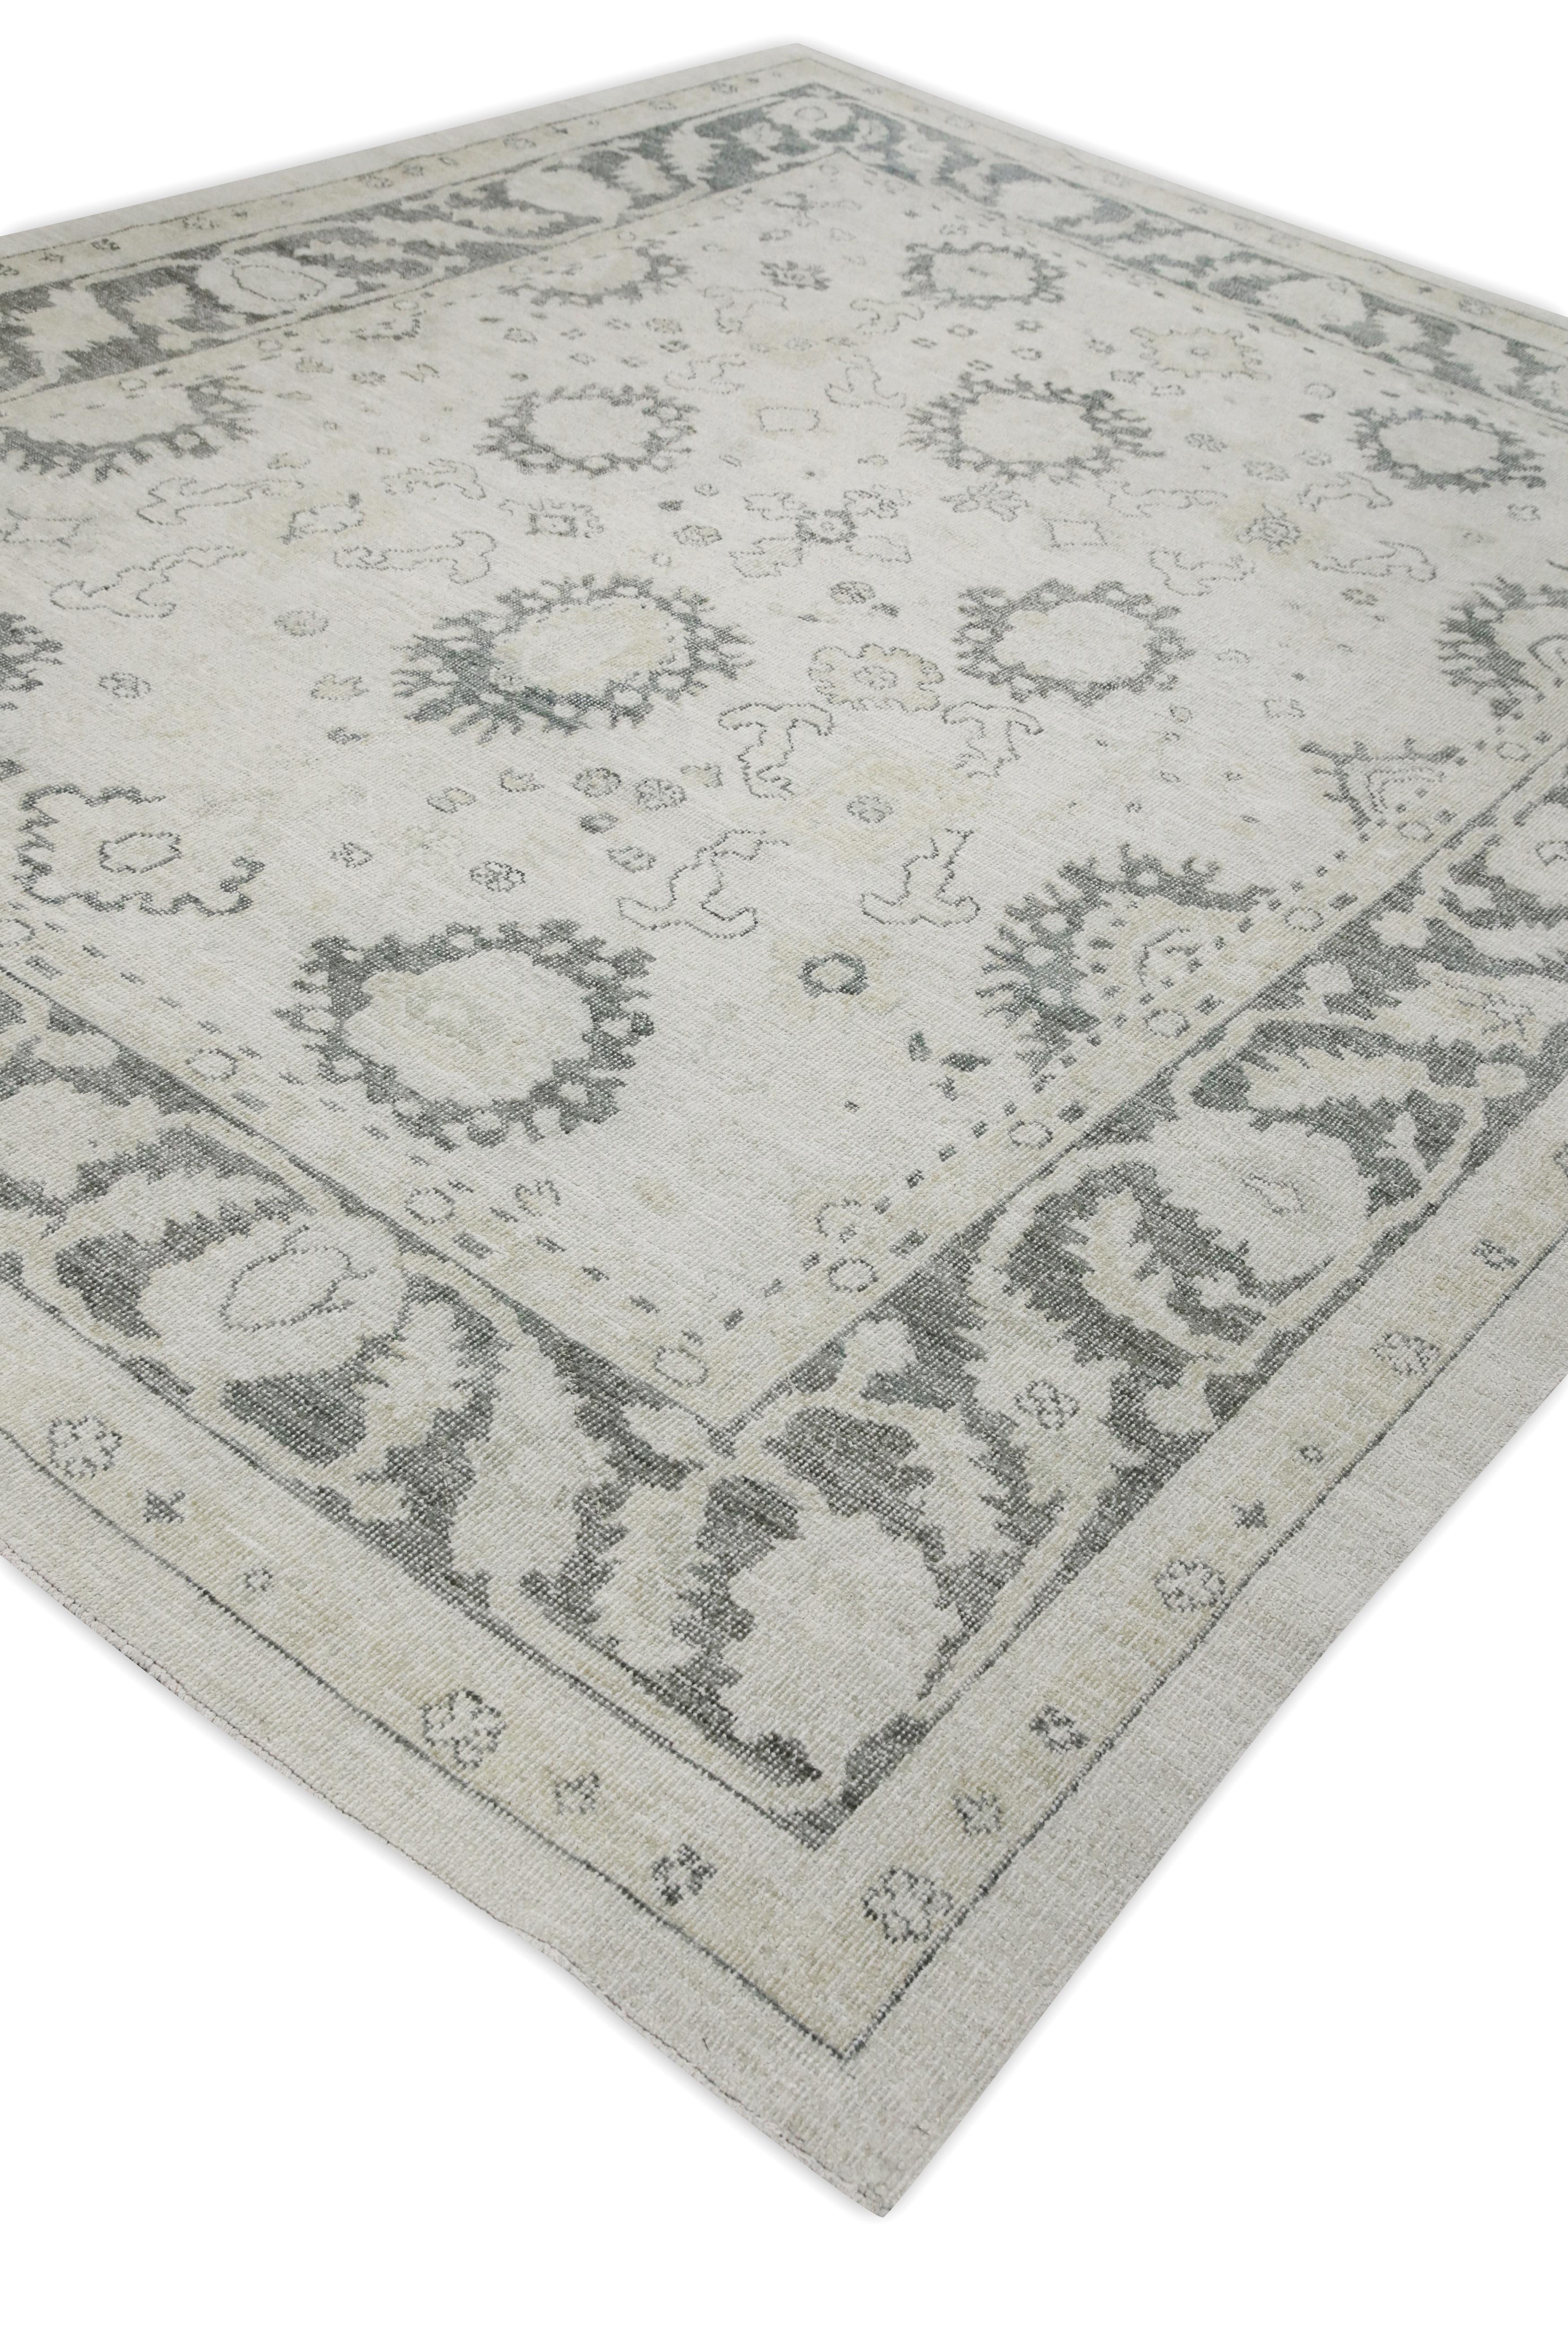 Contemporary White & Gray Floral Design Handwoven Wool Turkish Oushak Rug 9'4